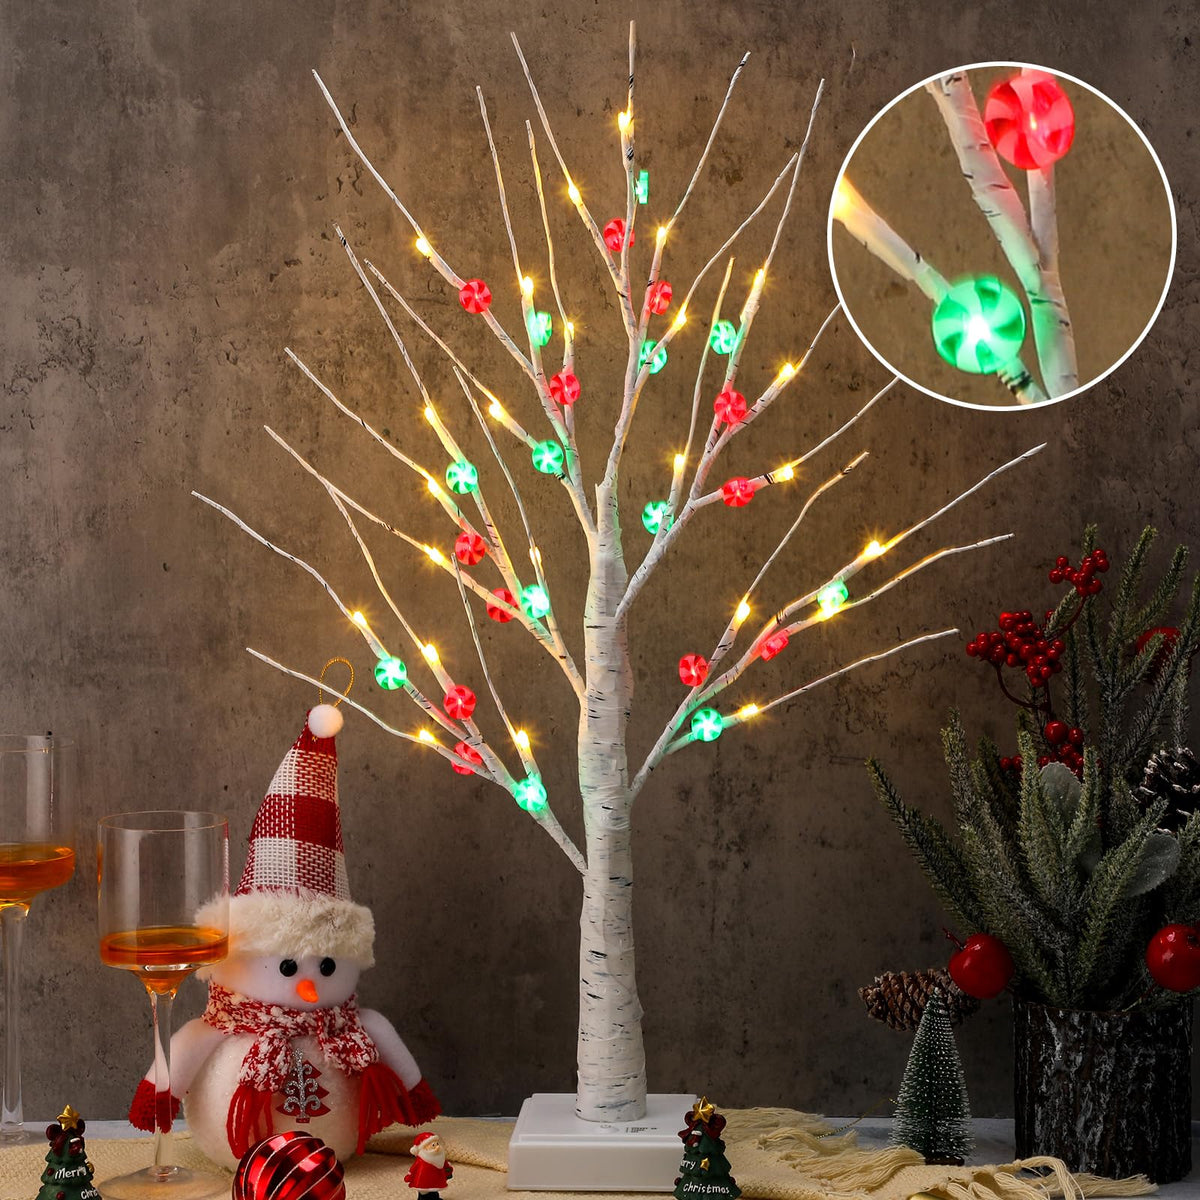 Vanthylit Lighted Tree Christmas Decorations Indoor, White Birch Tree With  LED Lights Battery Powered Timer, Tabletop Tree Winter Decor, Light Up